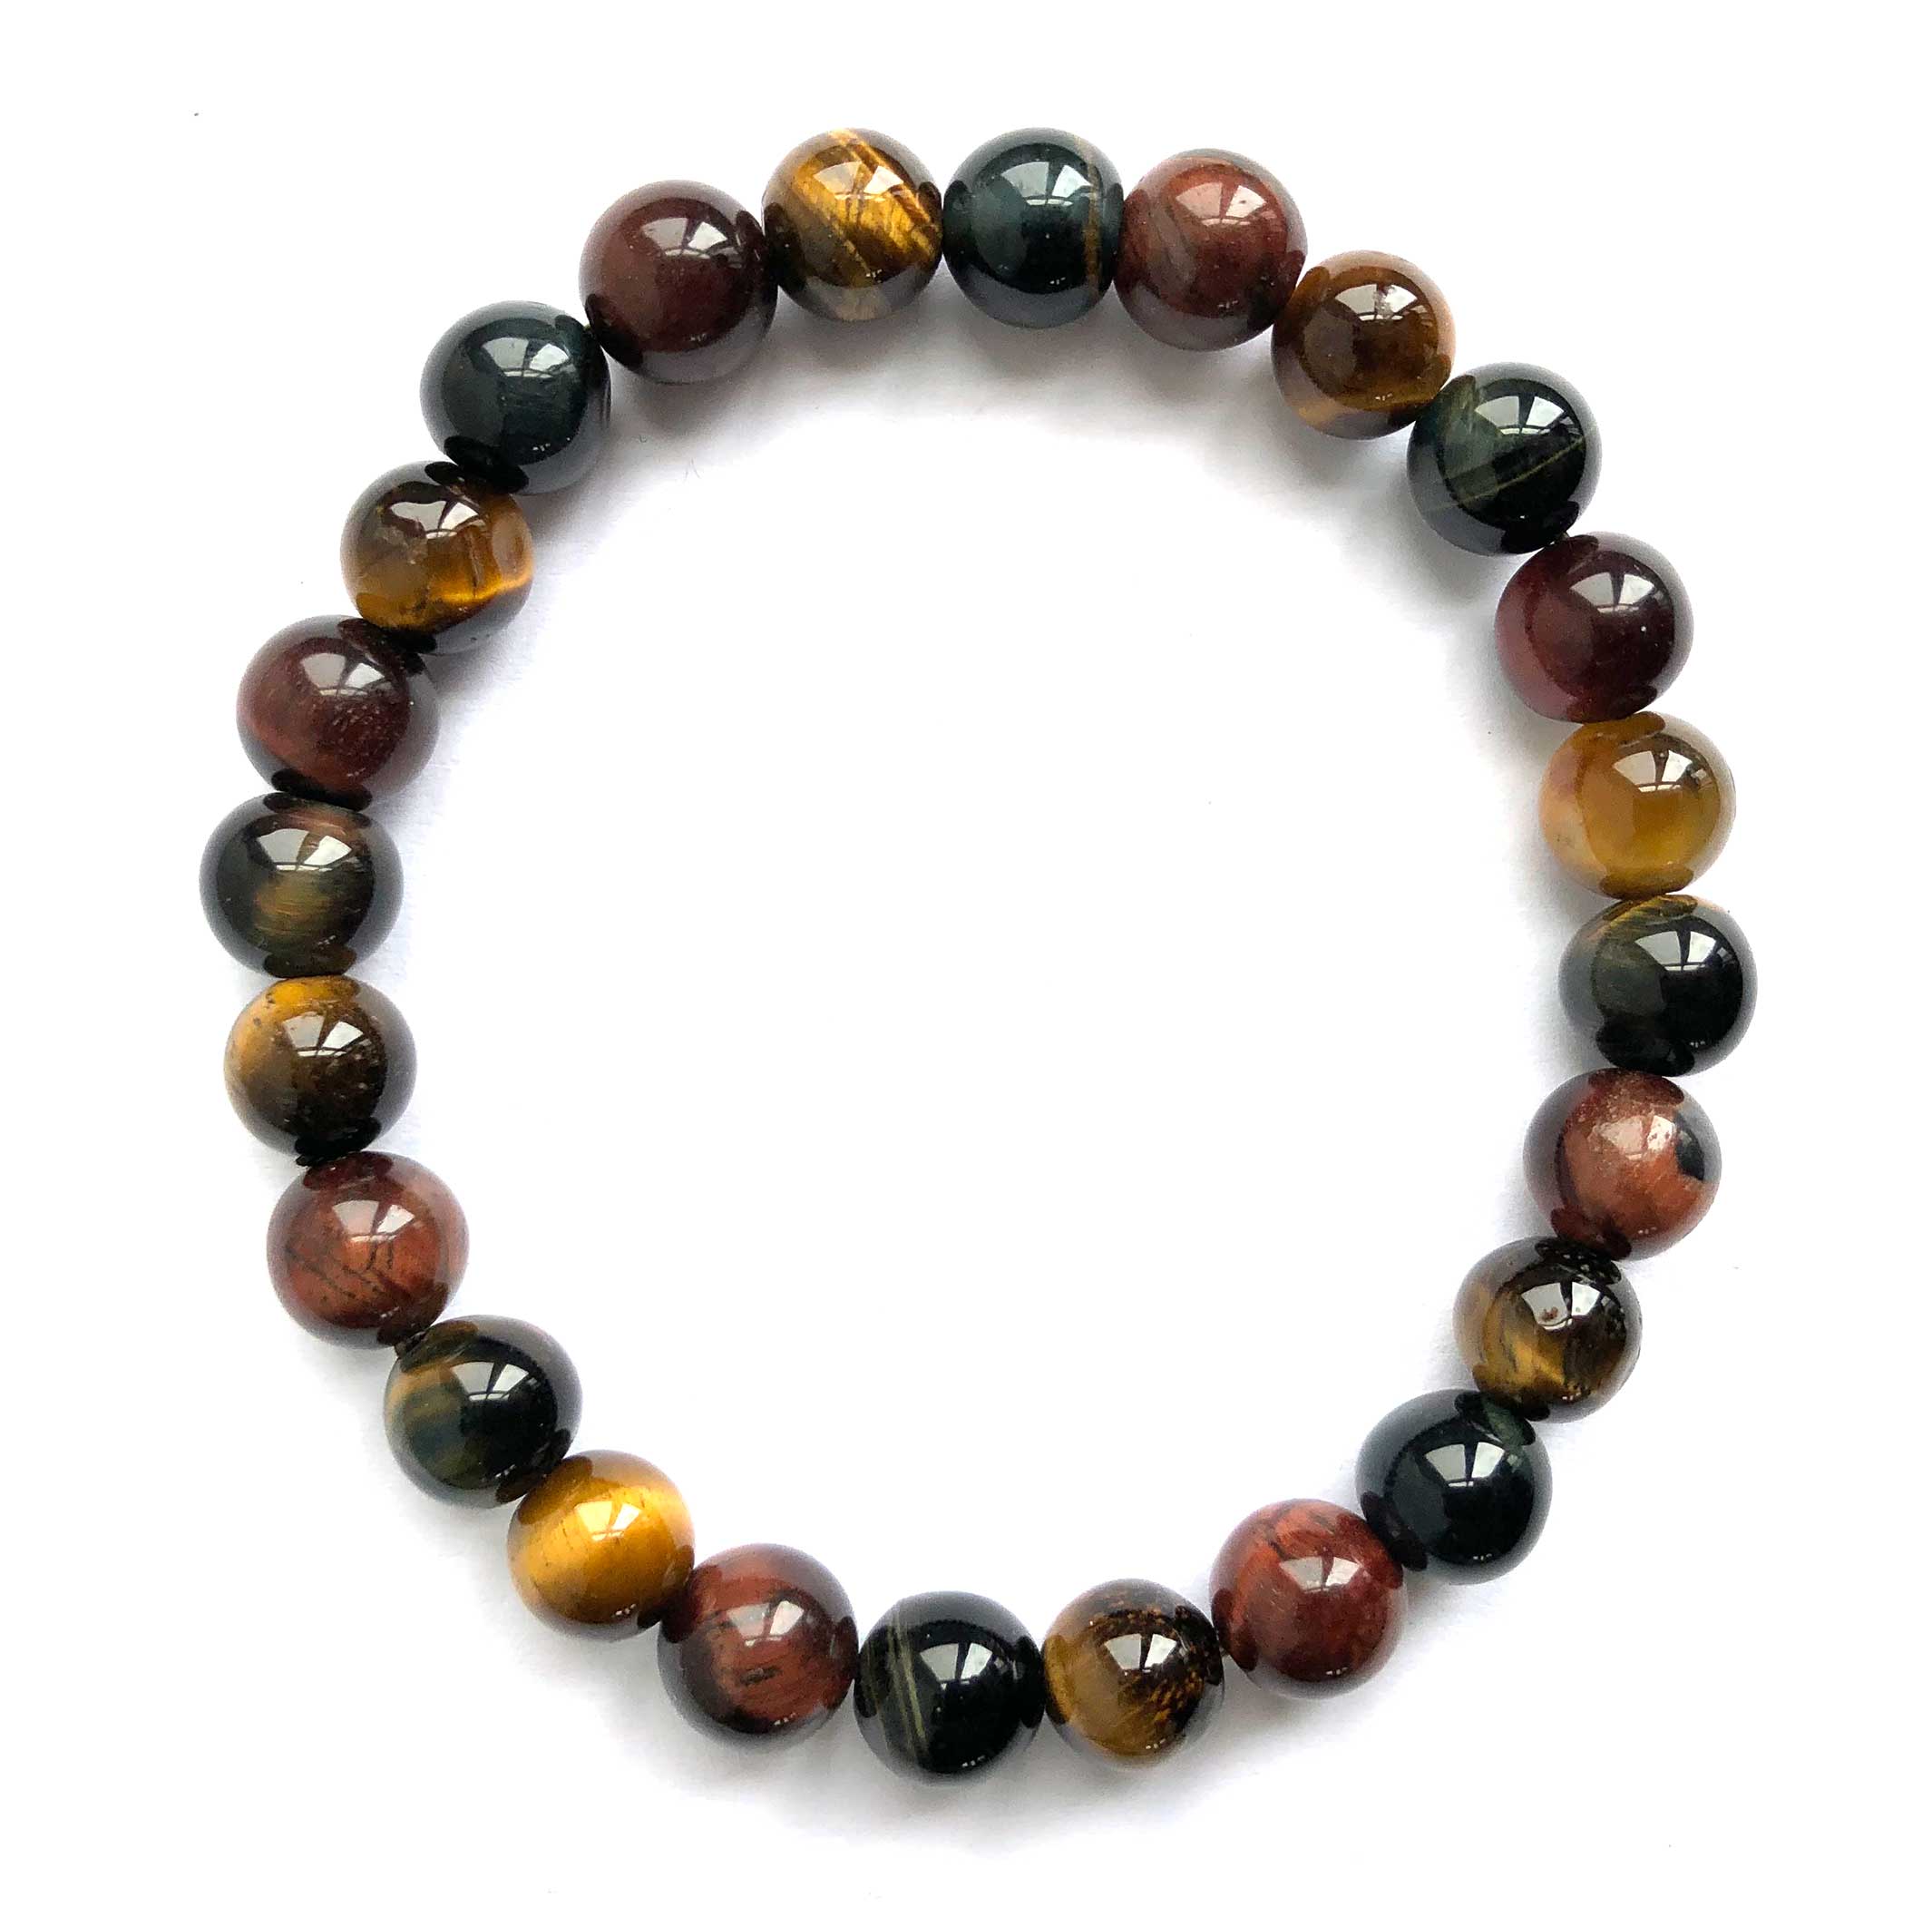 Triple Protection Beaded Double Wrap Adjustable Bracelet | Round Gemst –  SUNSEED THE JOURNEY